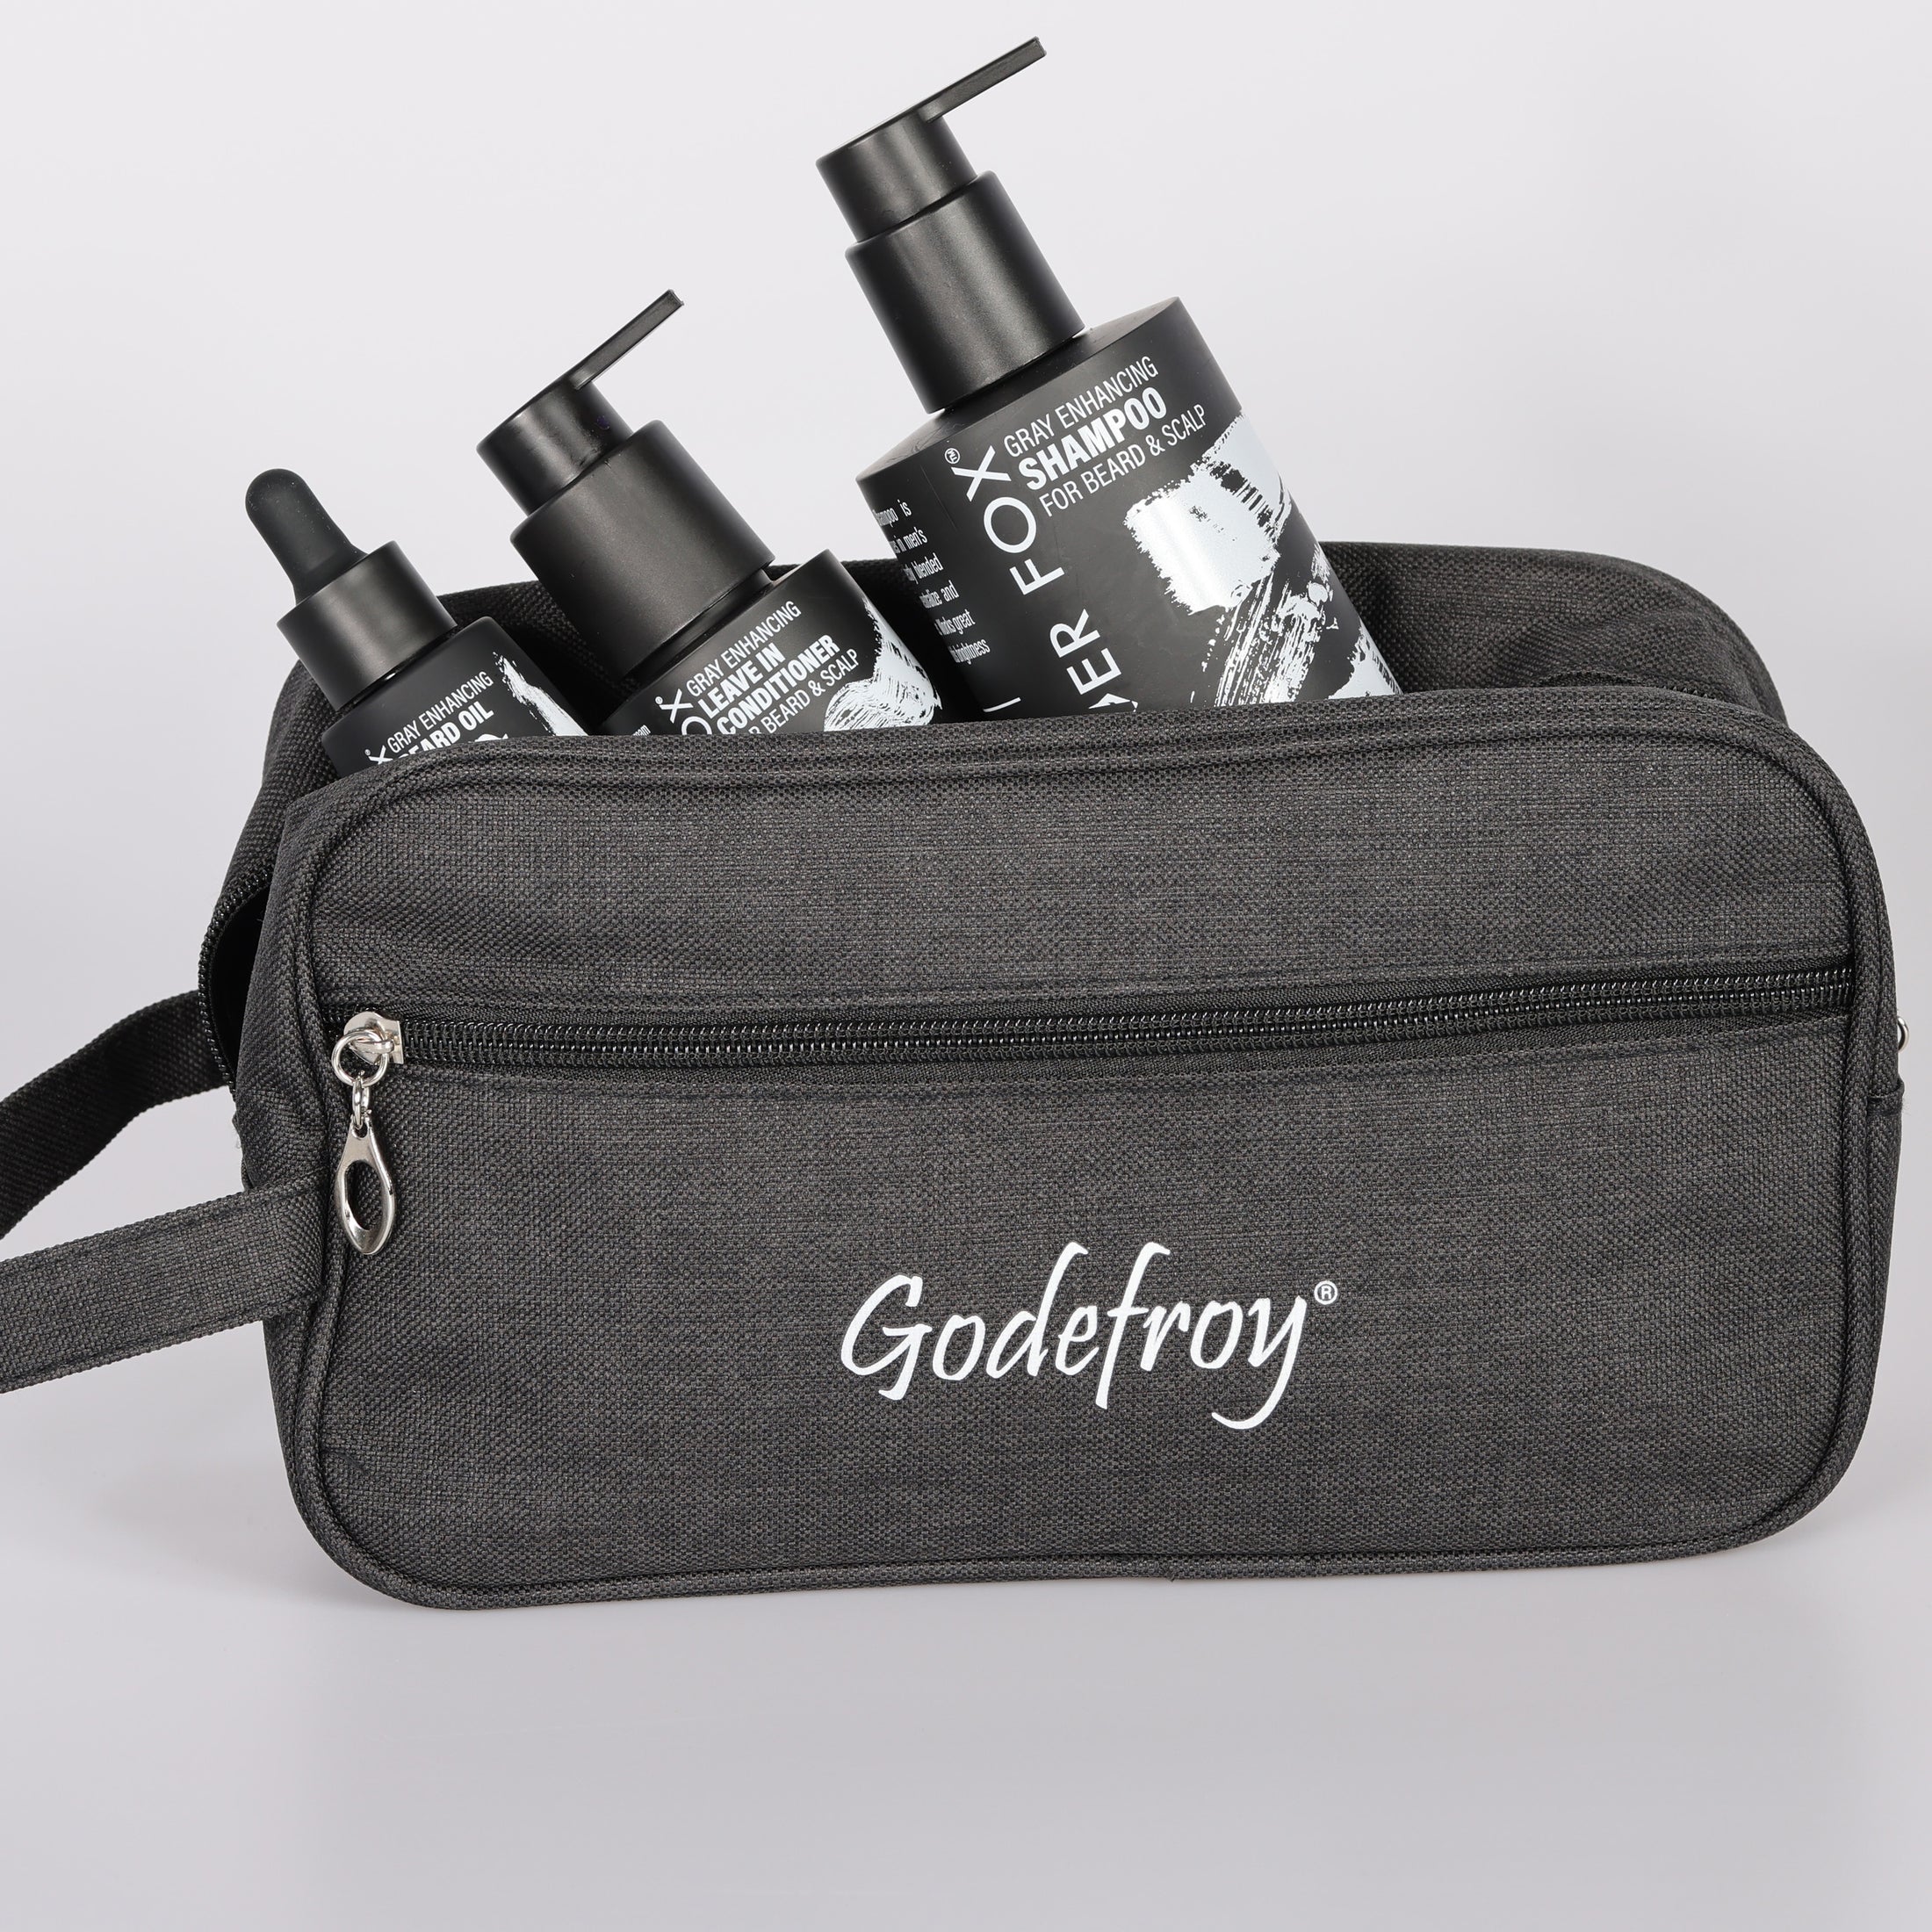 toiletry godefroy bag with silver fox hair products 